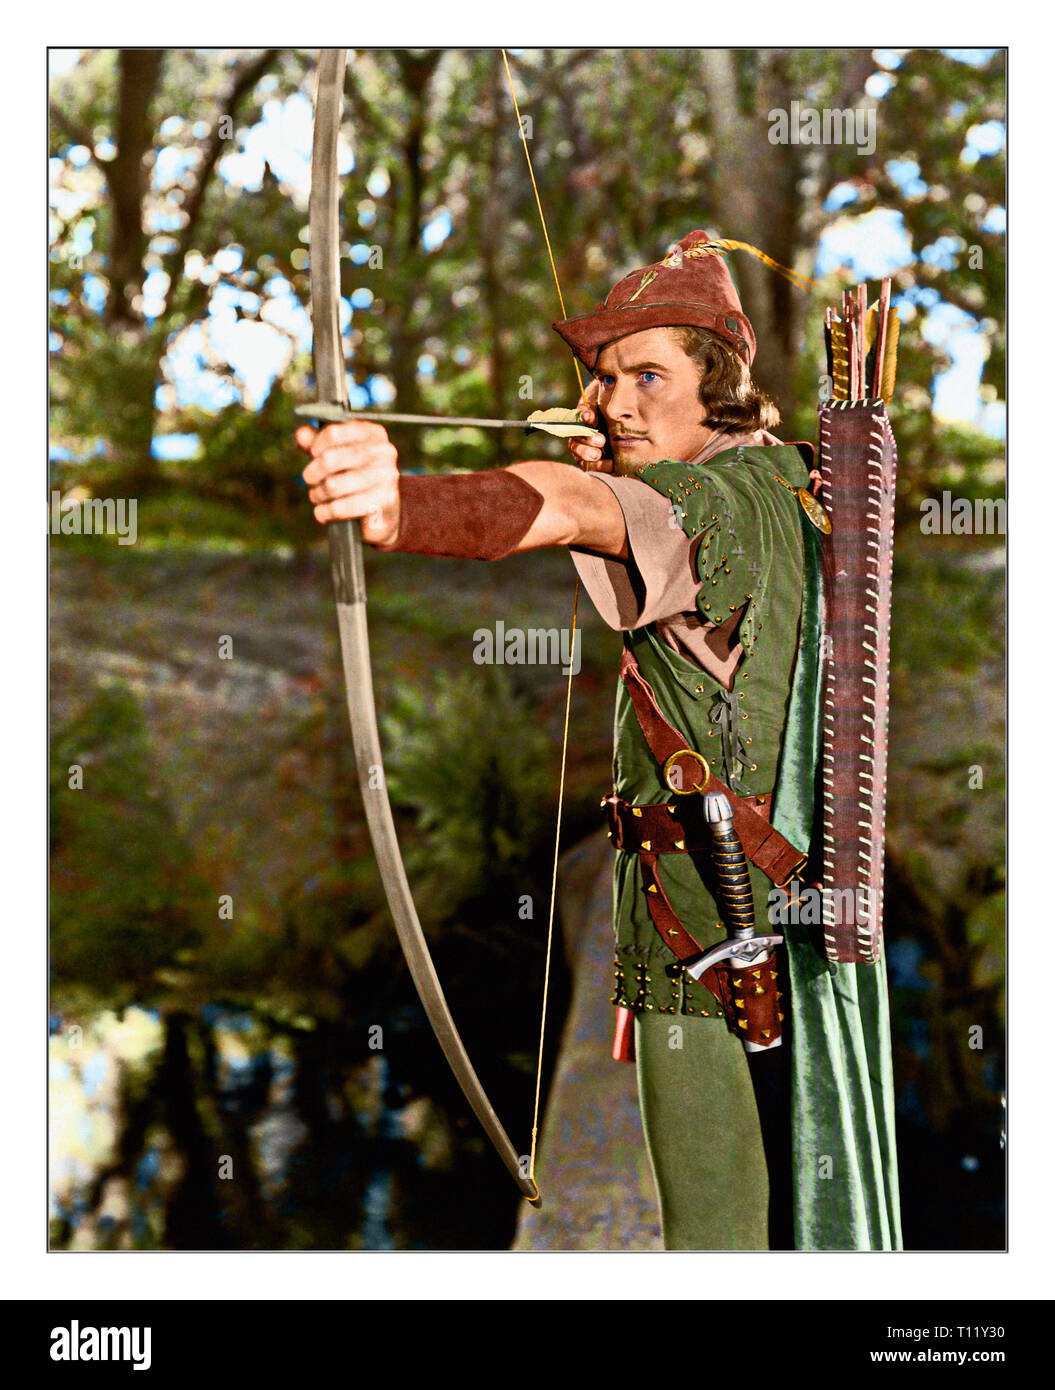 The Adventures of Robin Hood is a 1938 American Technicolor swashbuckler film from Warner Bros., produced by Hal B. Wallis and Henry Blanke, directed by Michael Curtiz and William Keighley, that stars Errol Flynn, Olivia de Havilland, Basil Rathbone, and Claude Rains. Credit: Hollywood Photo Archive / MediaPunch Stock Photo